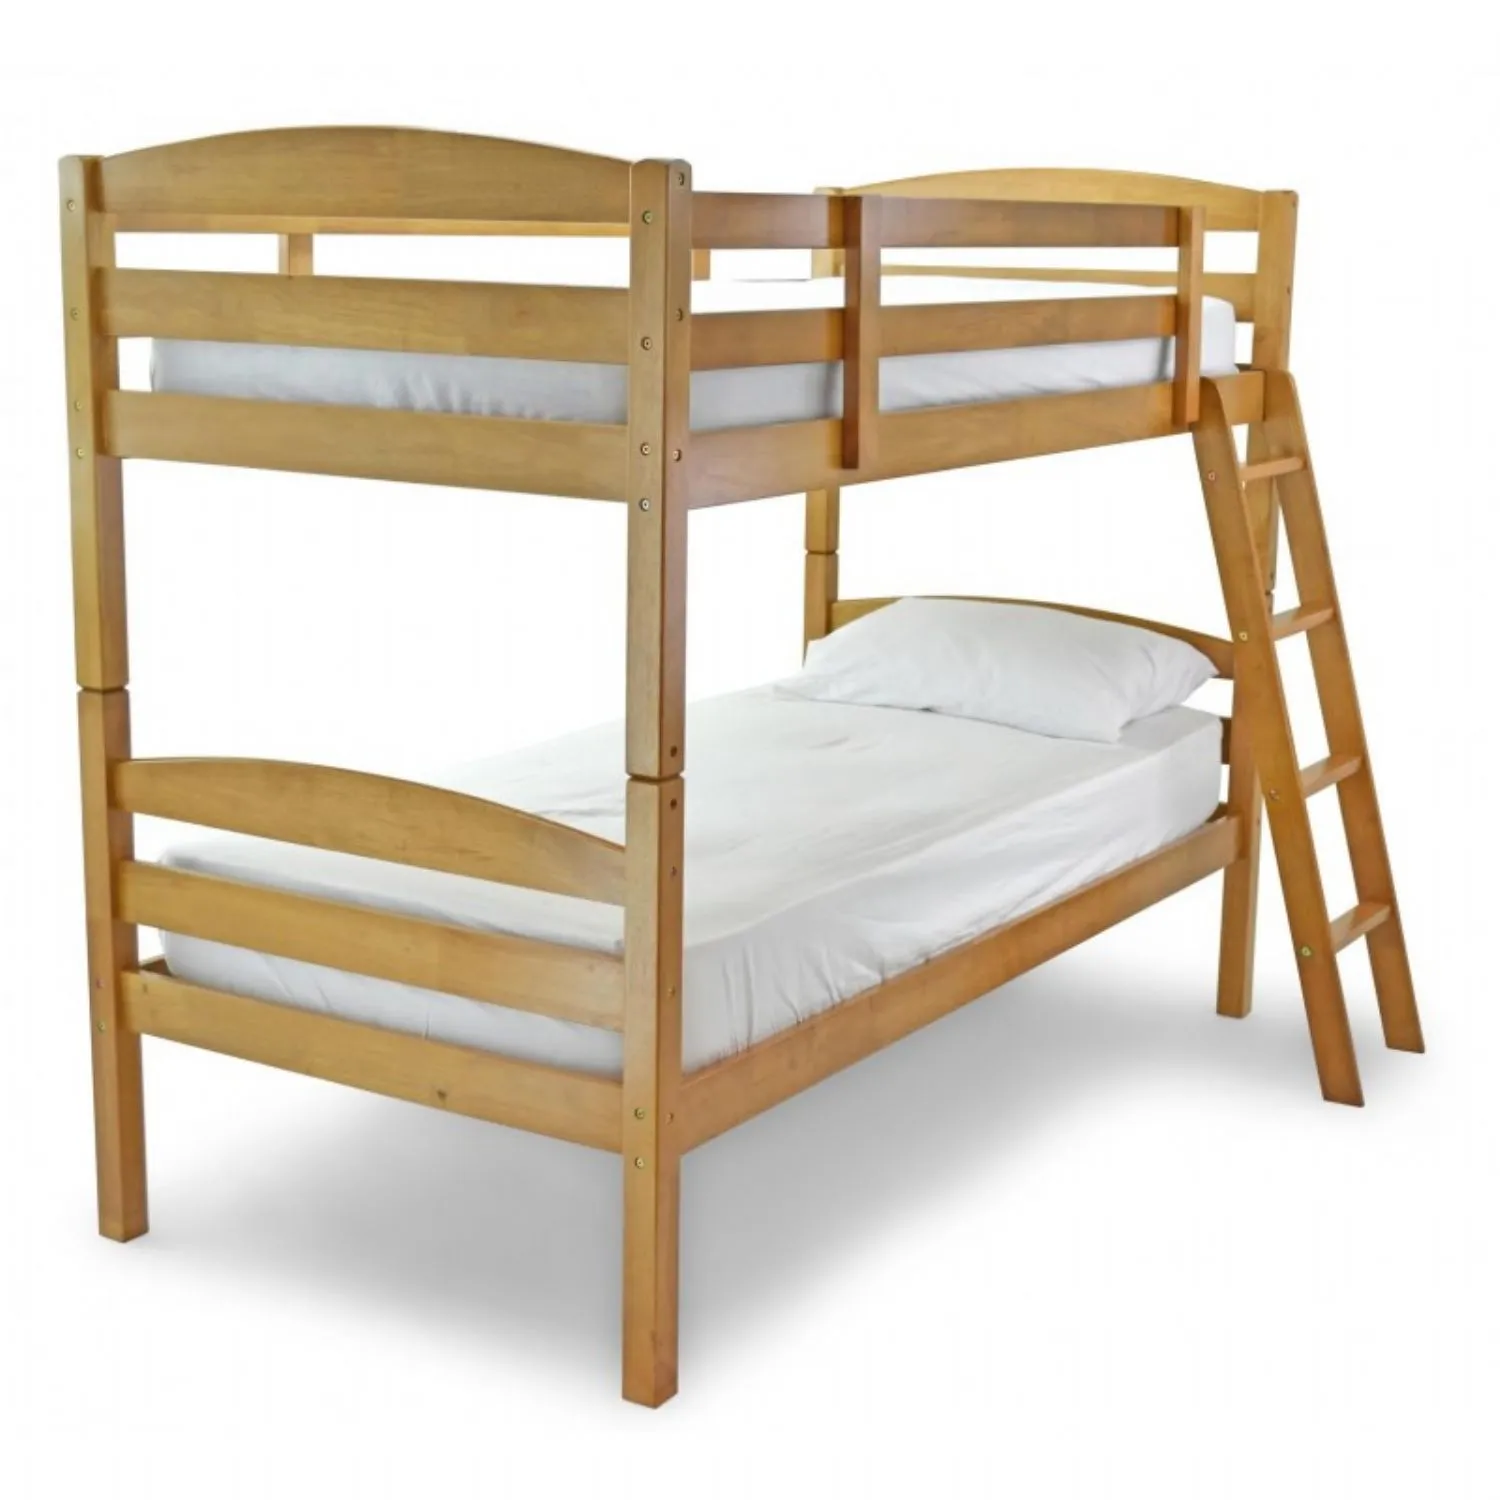 Solid Pine 3ft Bunk Bed with Curved Headboard